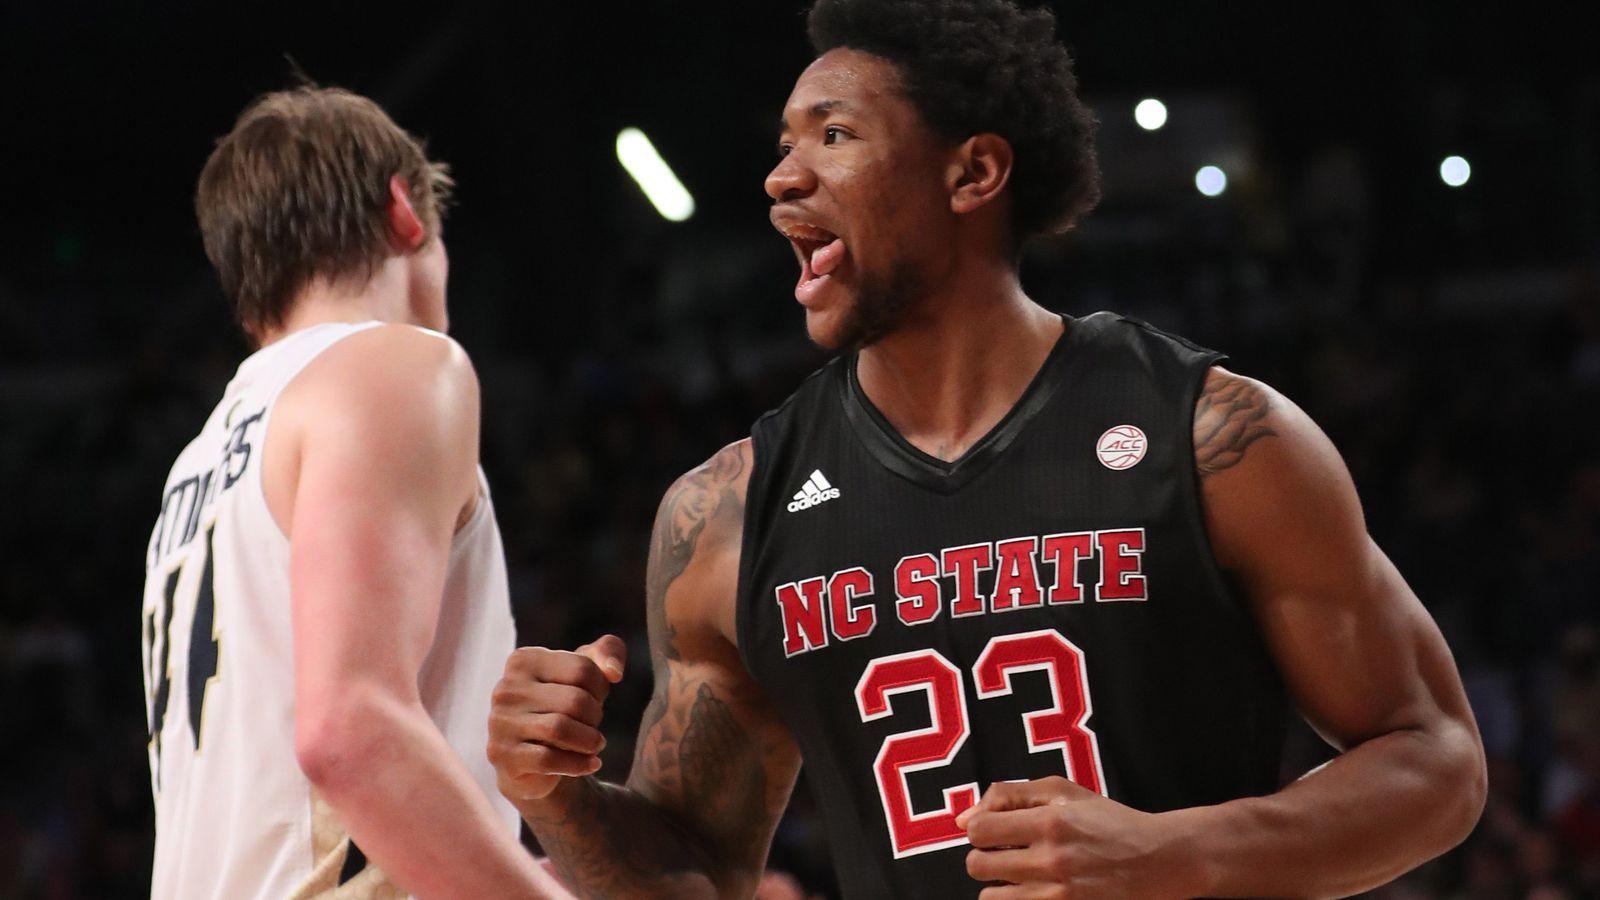 NC State forward Ted Kapita expected to sign with agent and turn